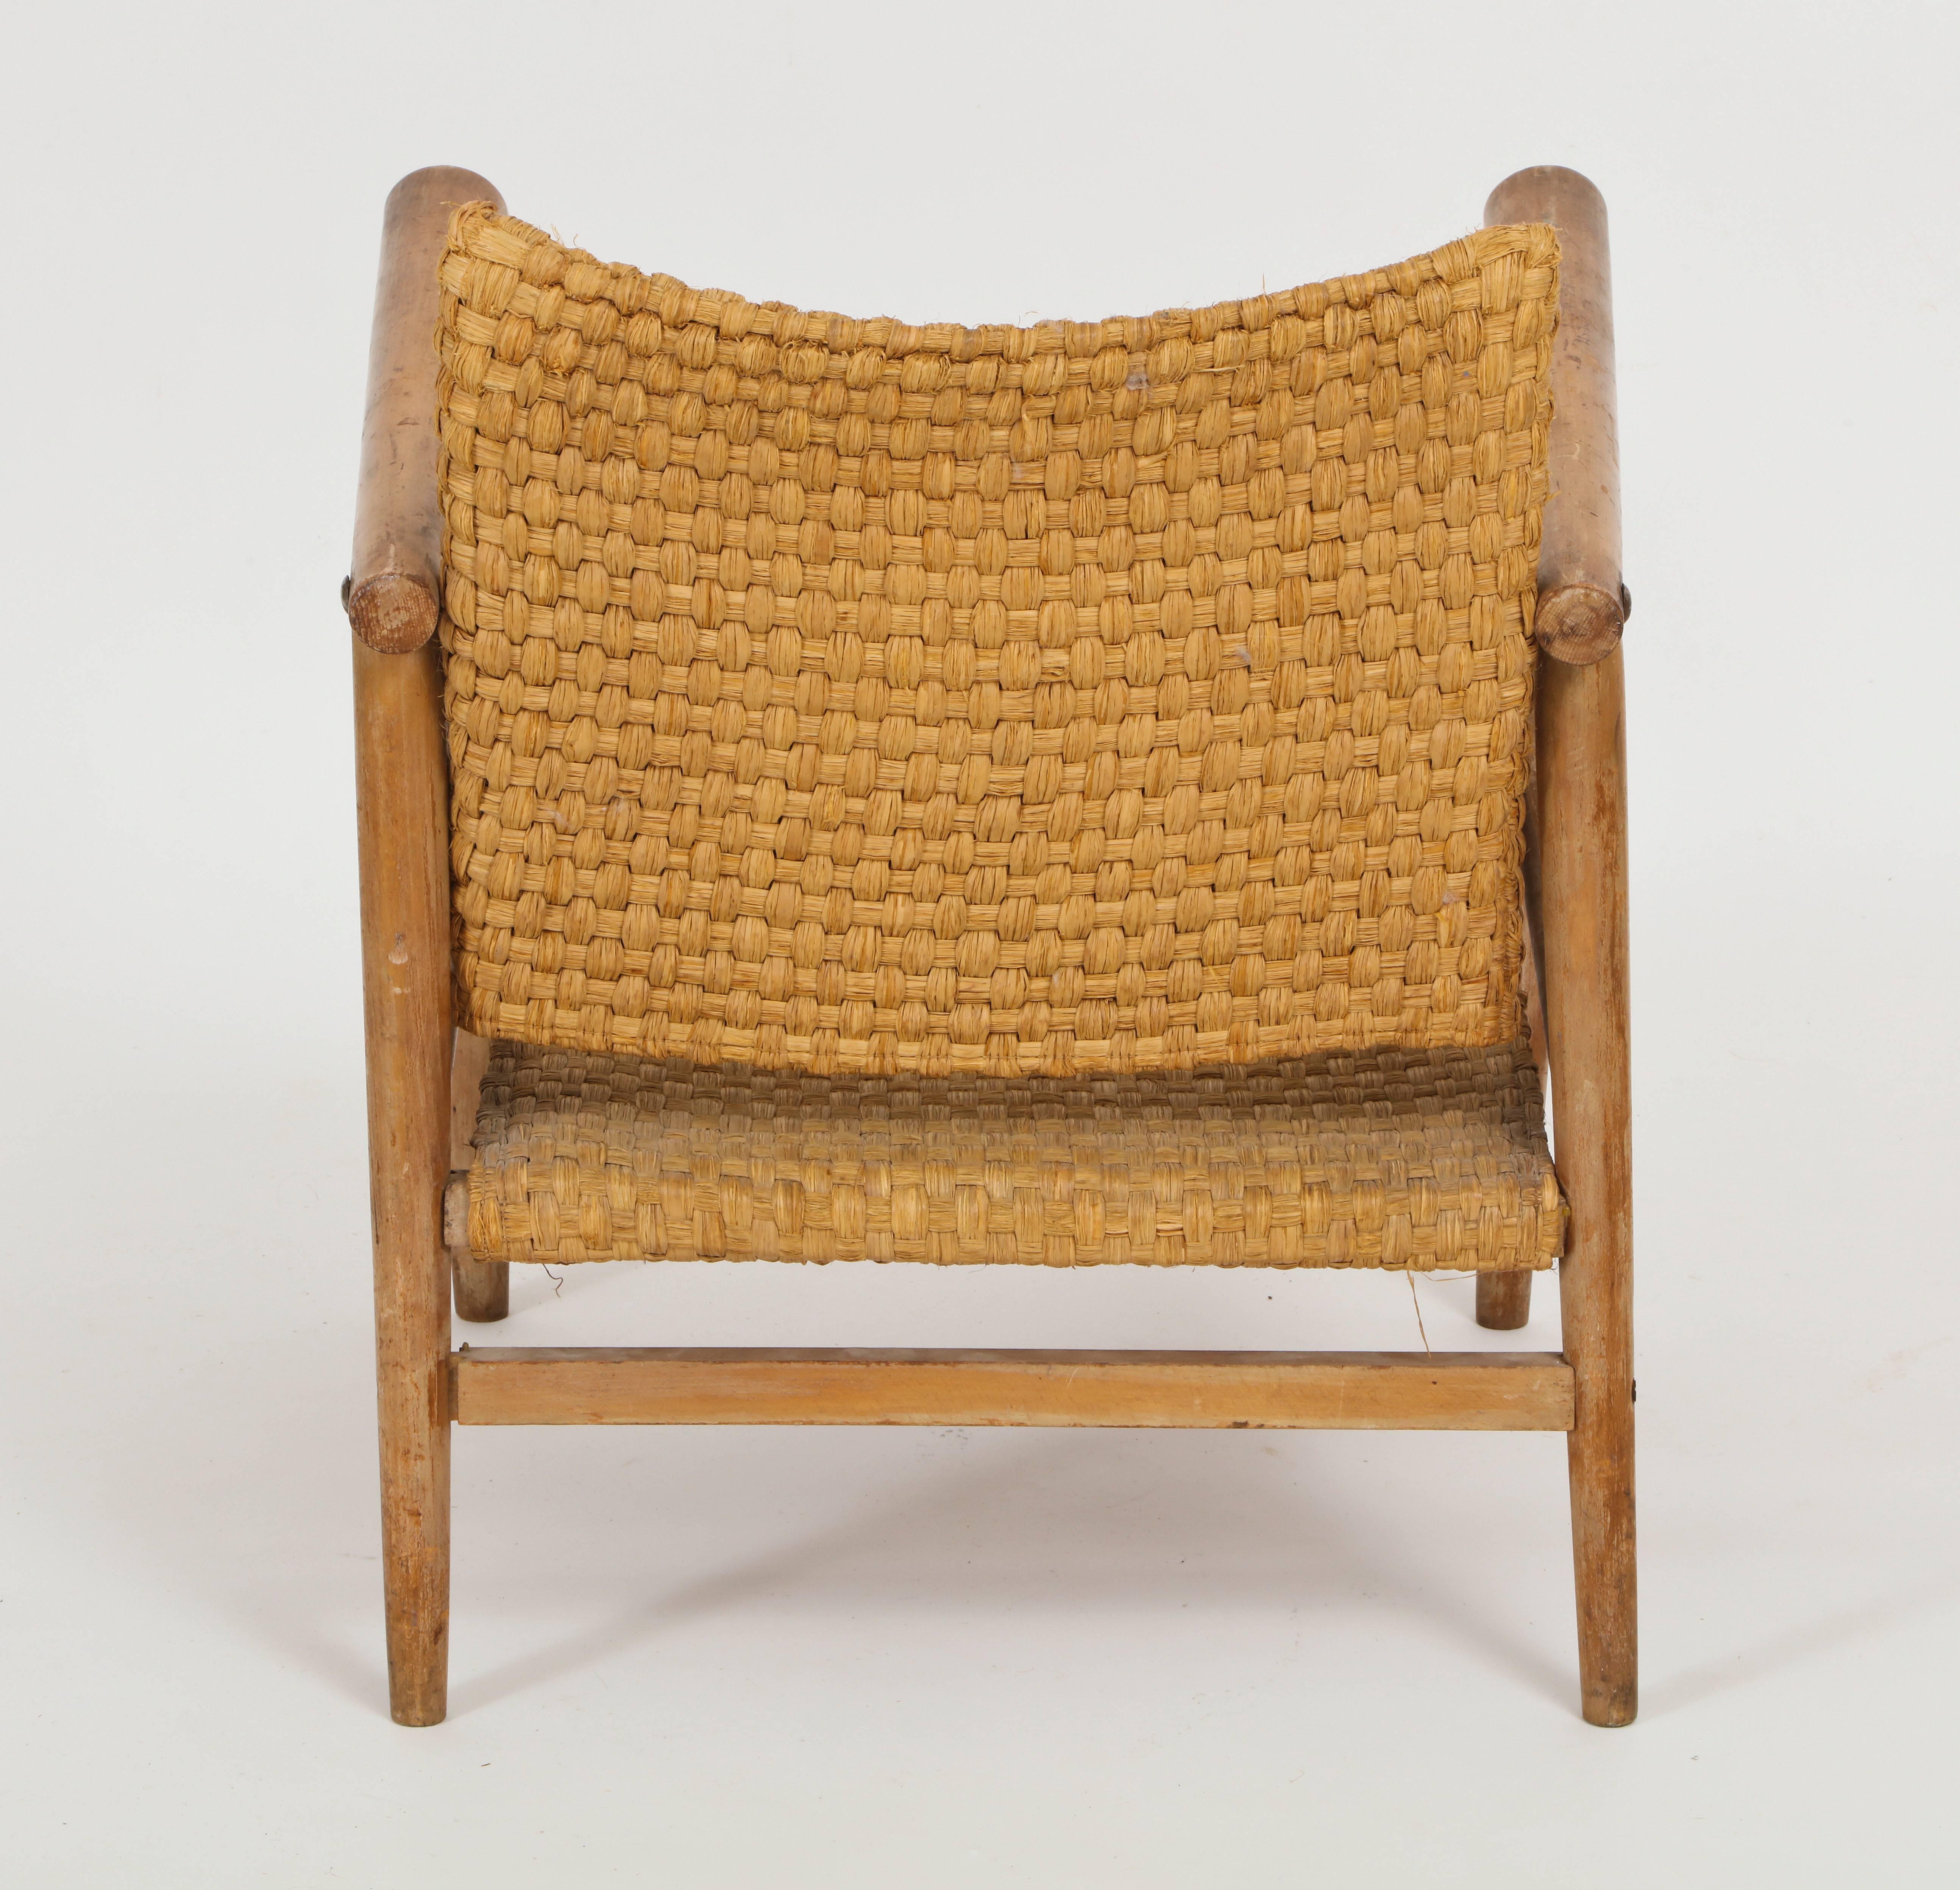 Mid-Century Modern Straw Wicker Woven Rush Chair Midcentury Jean Michel Frank Style, 1930, France For Sale